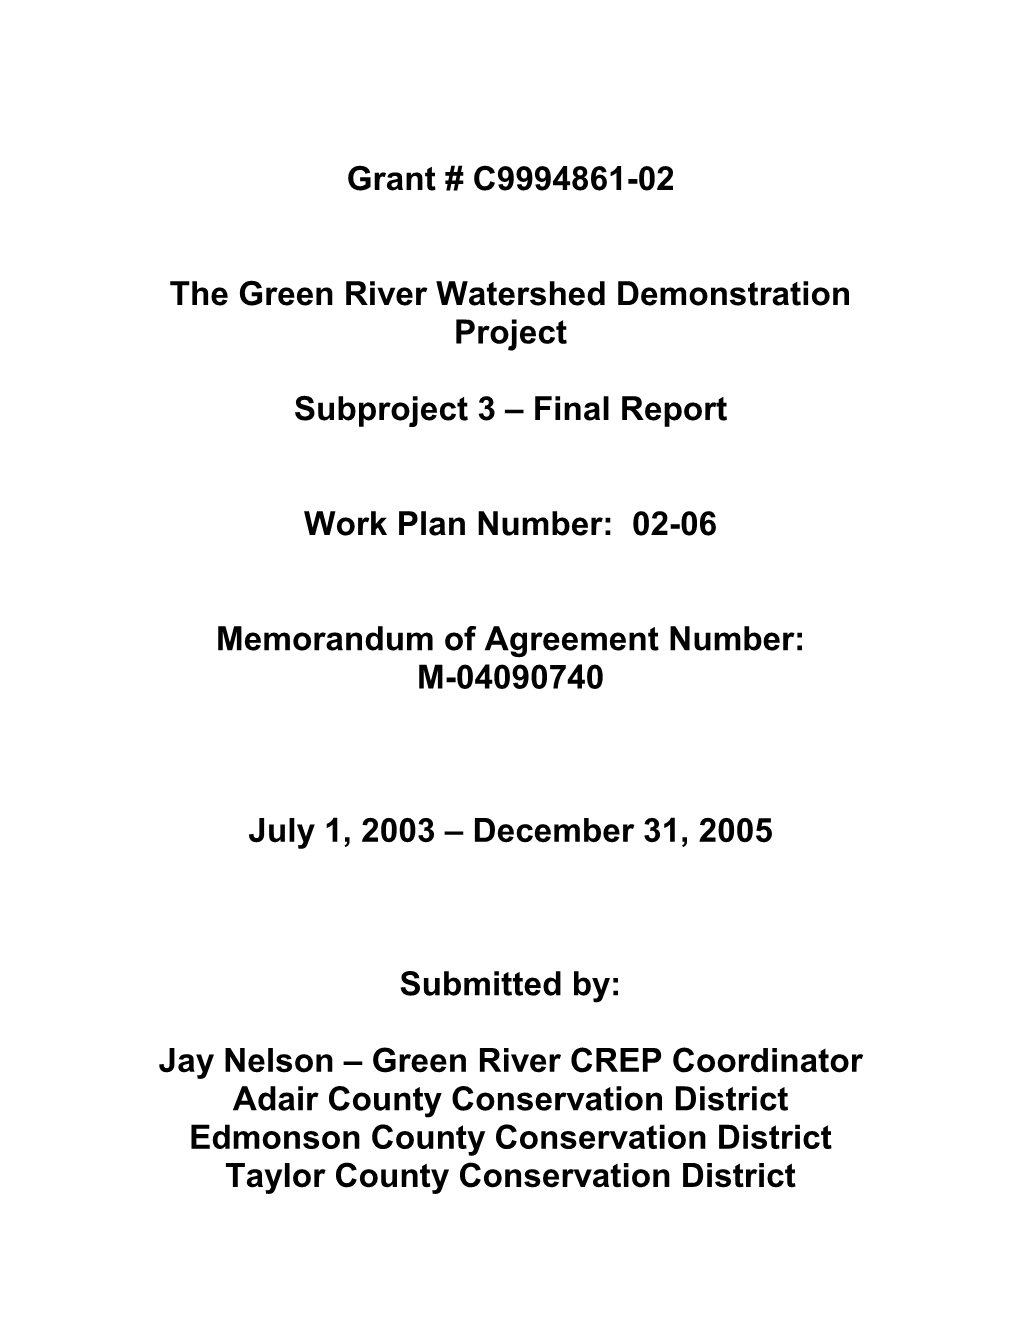 Green River Watershed Demonstration Project: Final Report